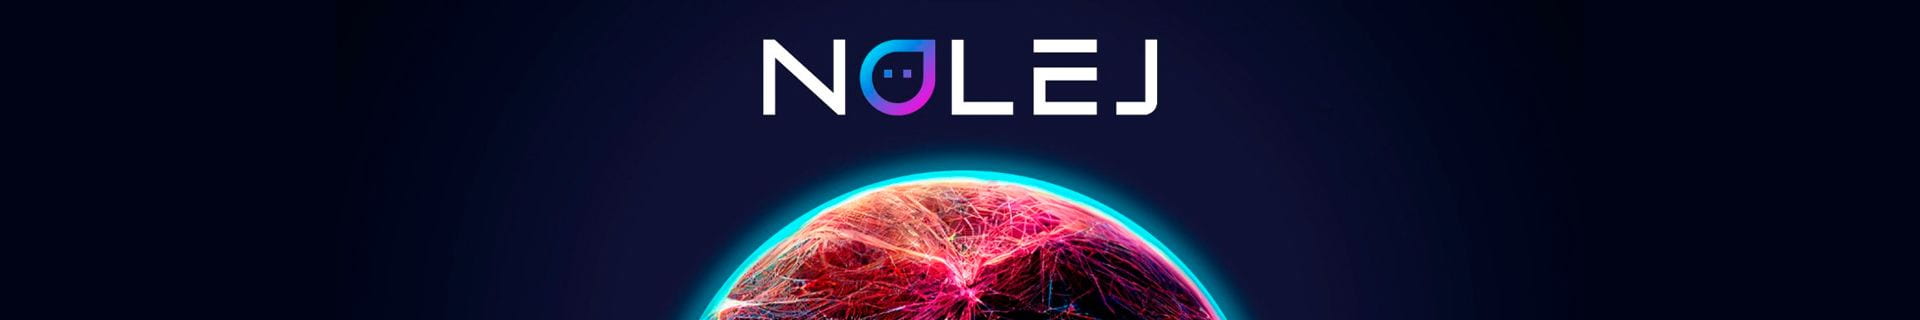 Image: Nolej Logo and image of a wired, connected planet